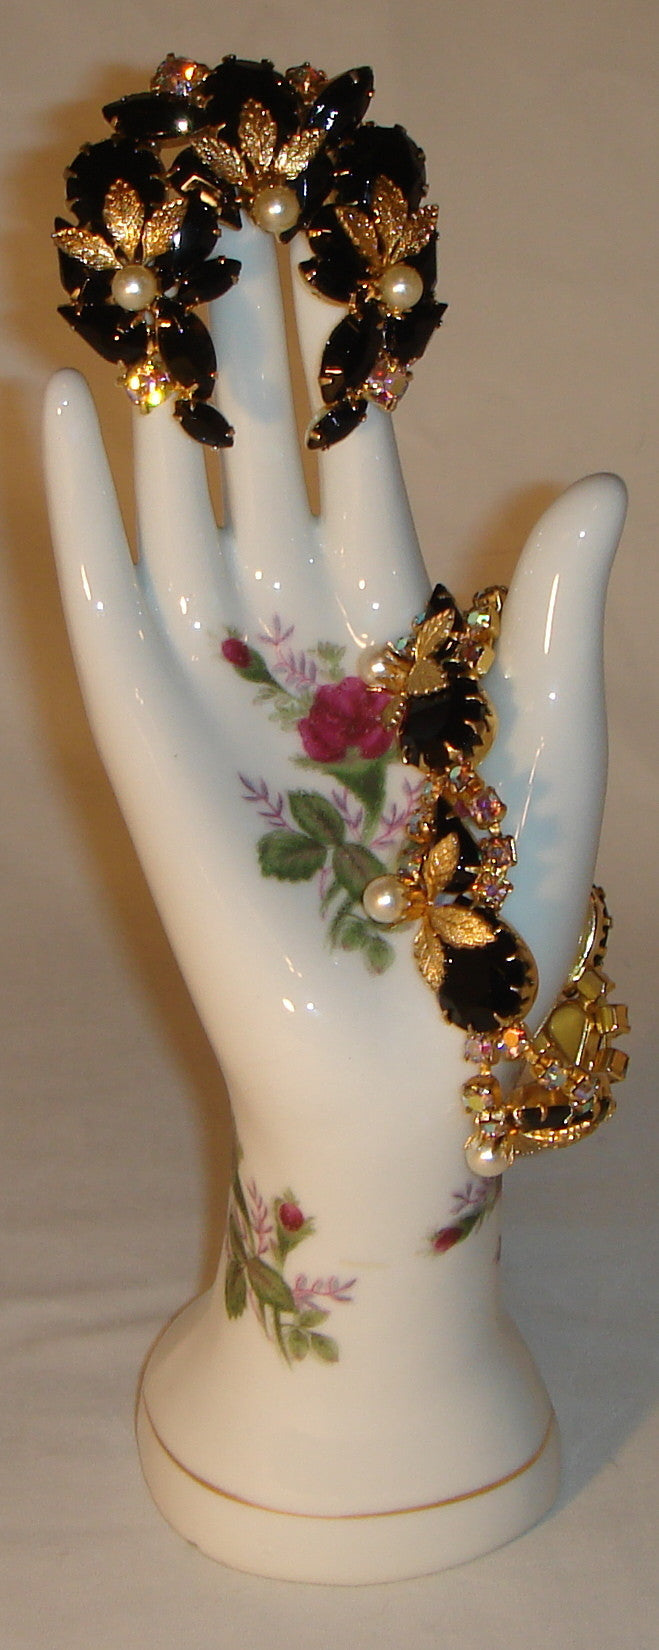 WEISS - Bracelet & Brooch!- Jet - Aurora Borealis crystal - Pearl (faux) - gold tone leaves